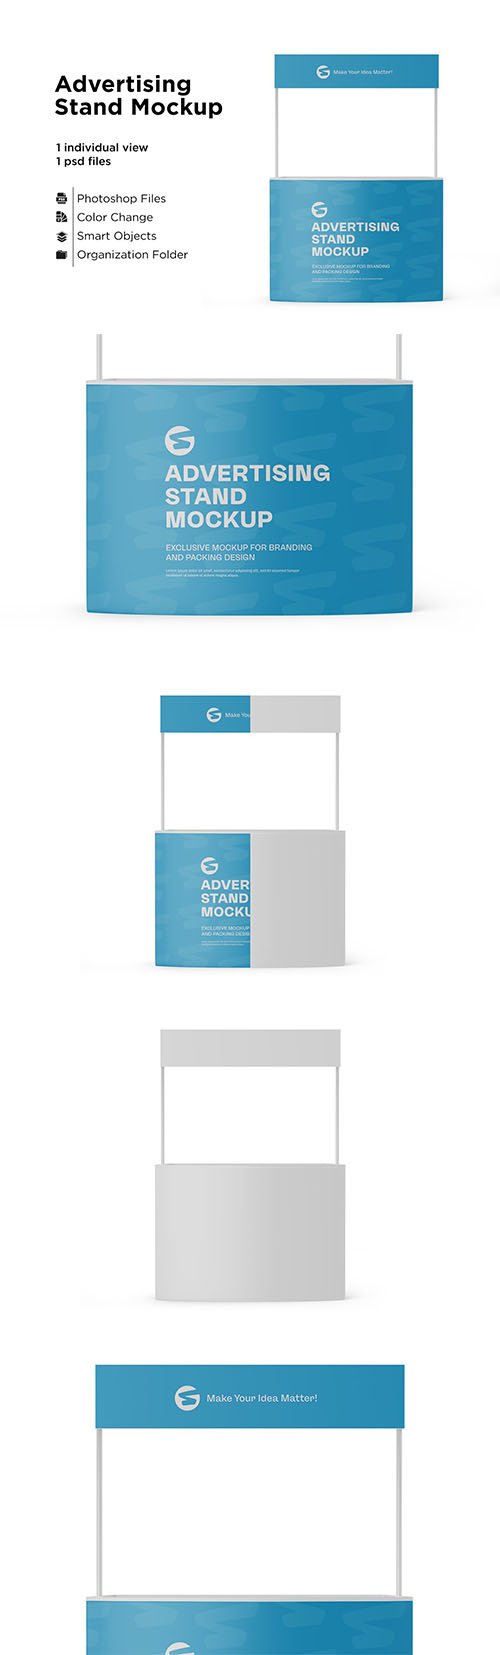 Advertising Stand Mockup 6063294